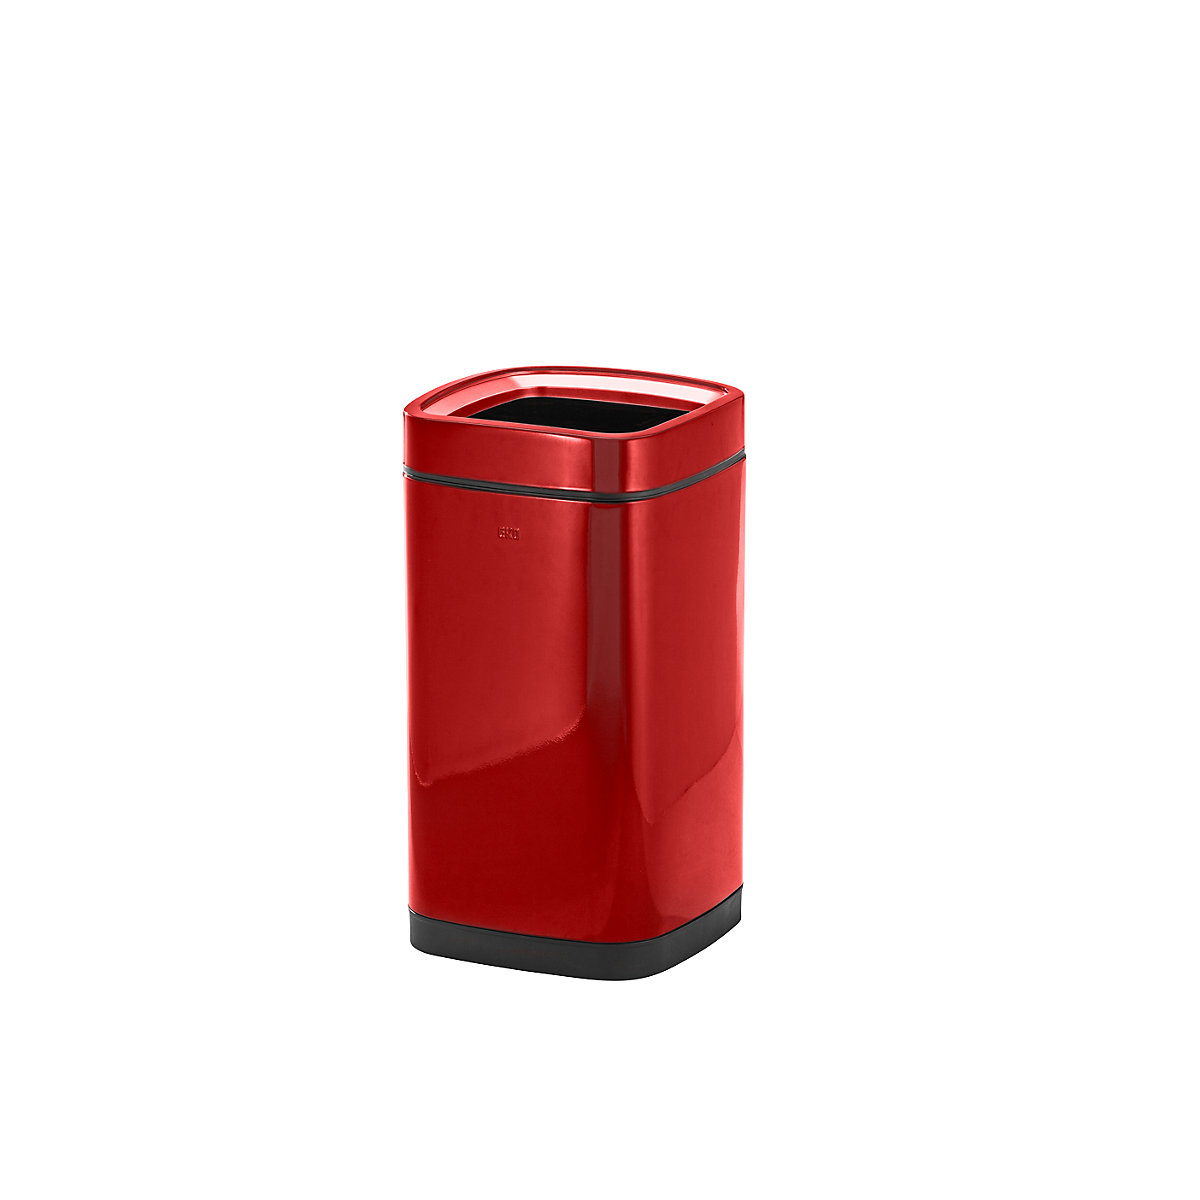 Waste paper bin with inner container – EKO, capacity 28 l, red-3